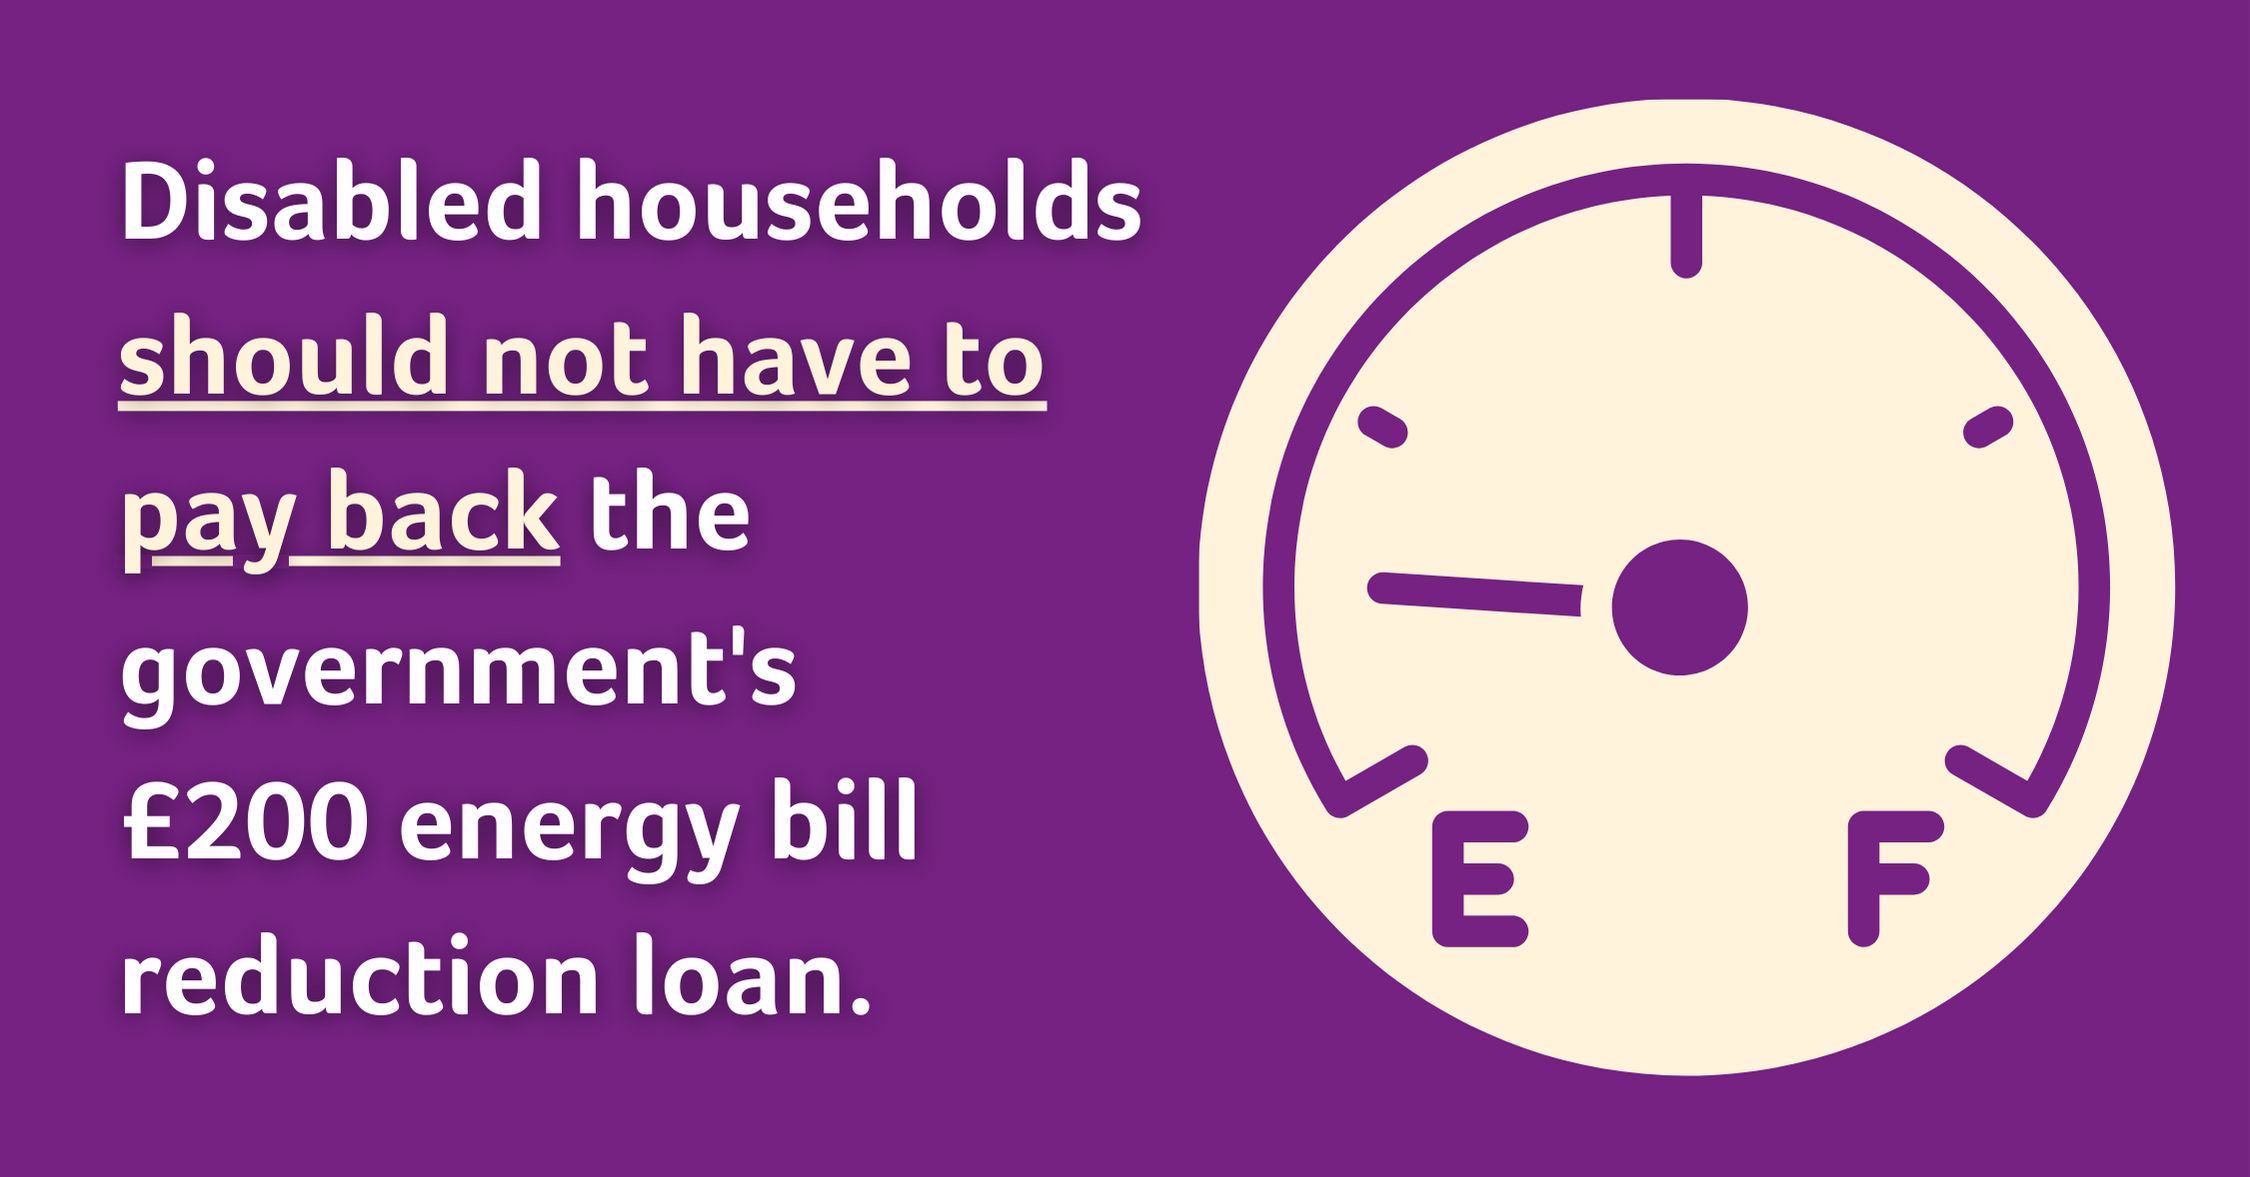 Contact Calls For Government To Cancel Disabled Household Energy Rebate 